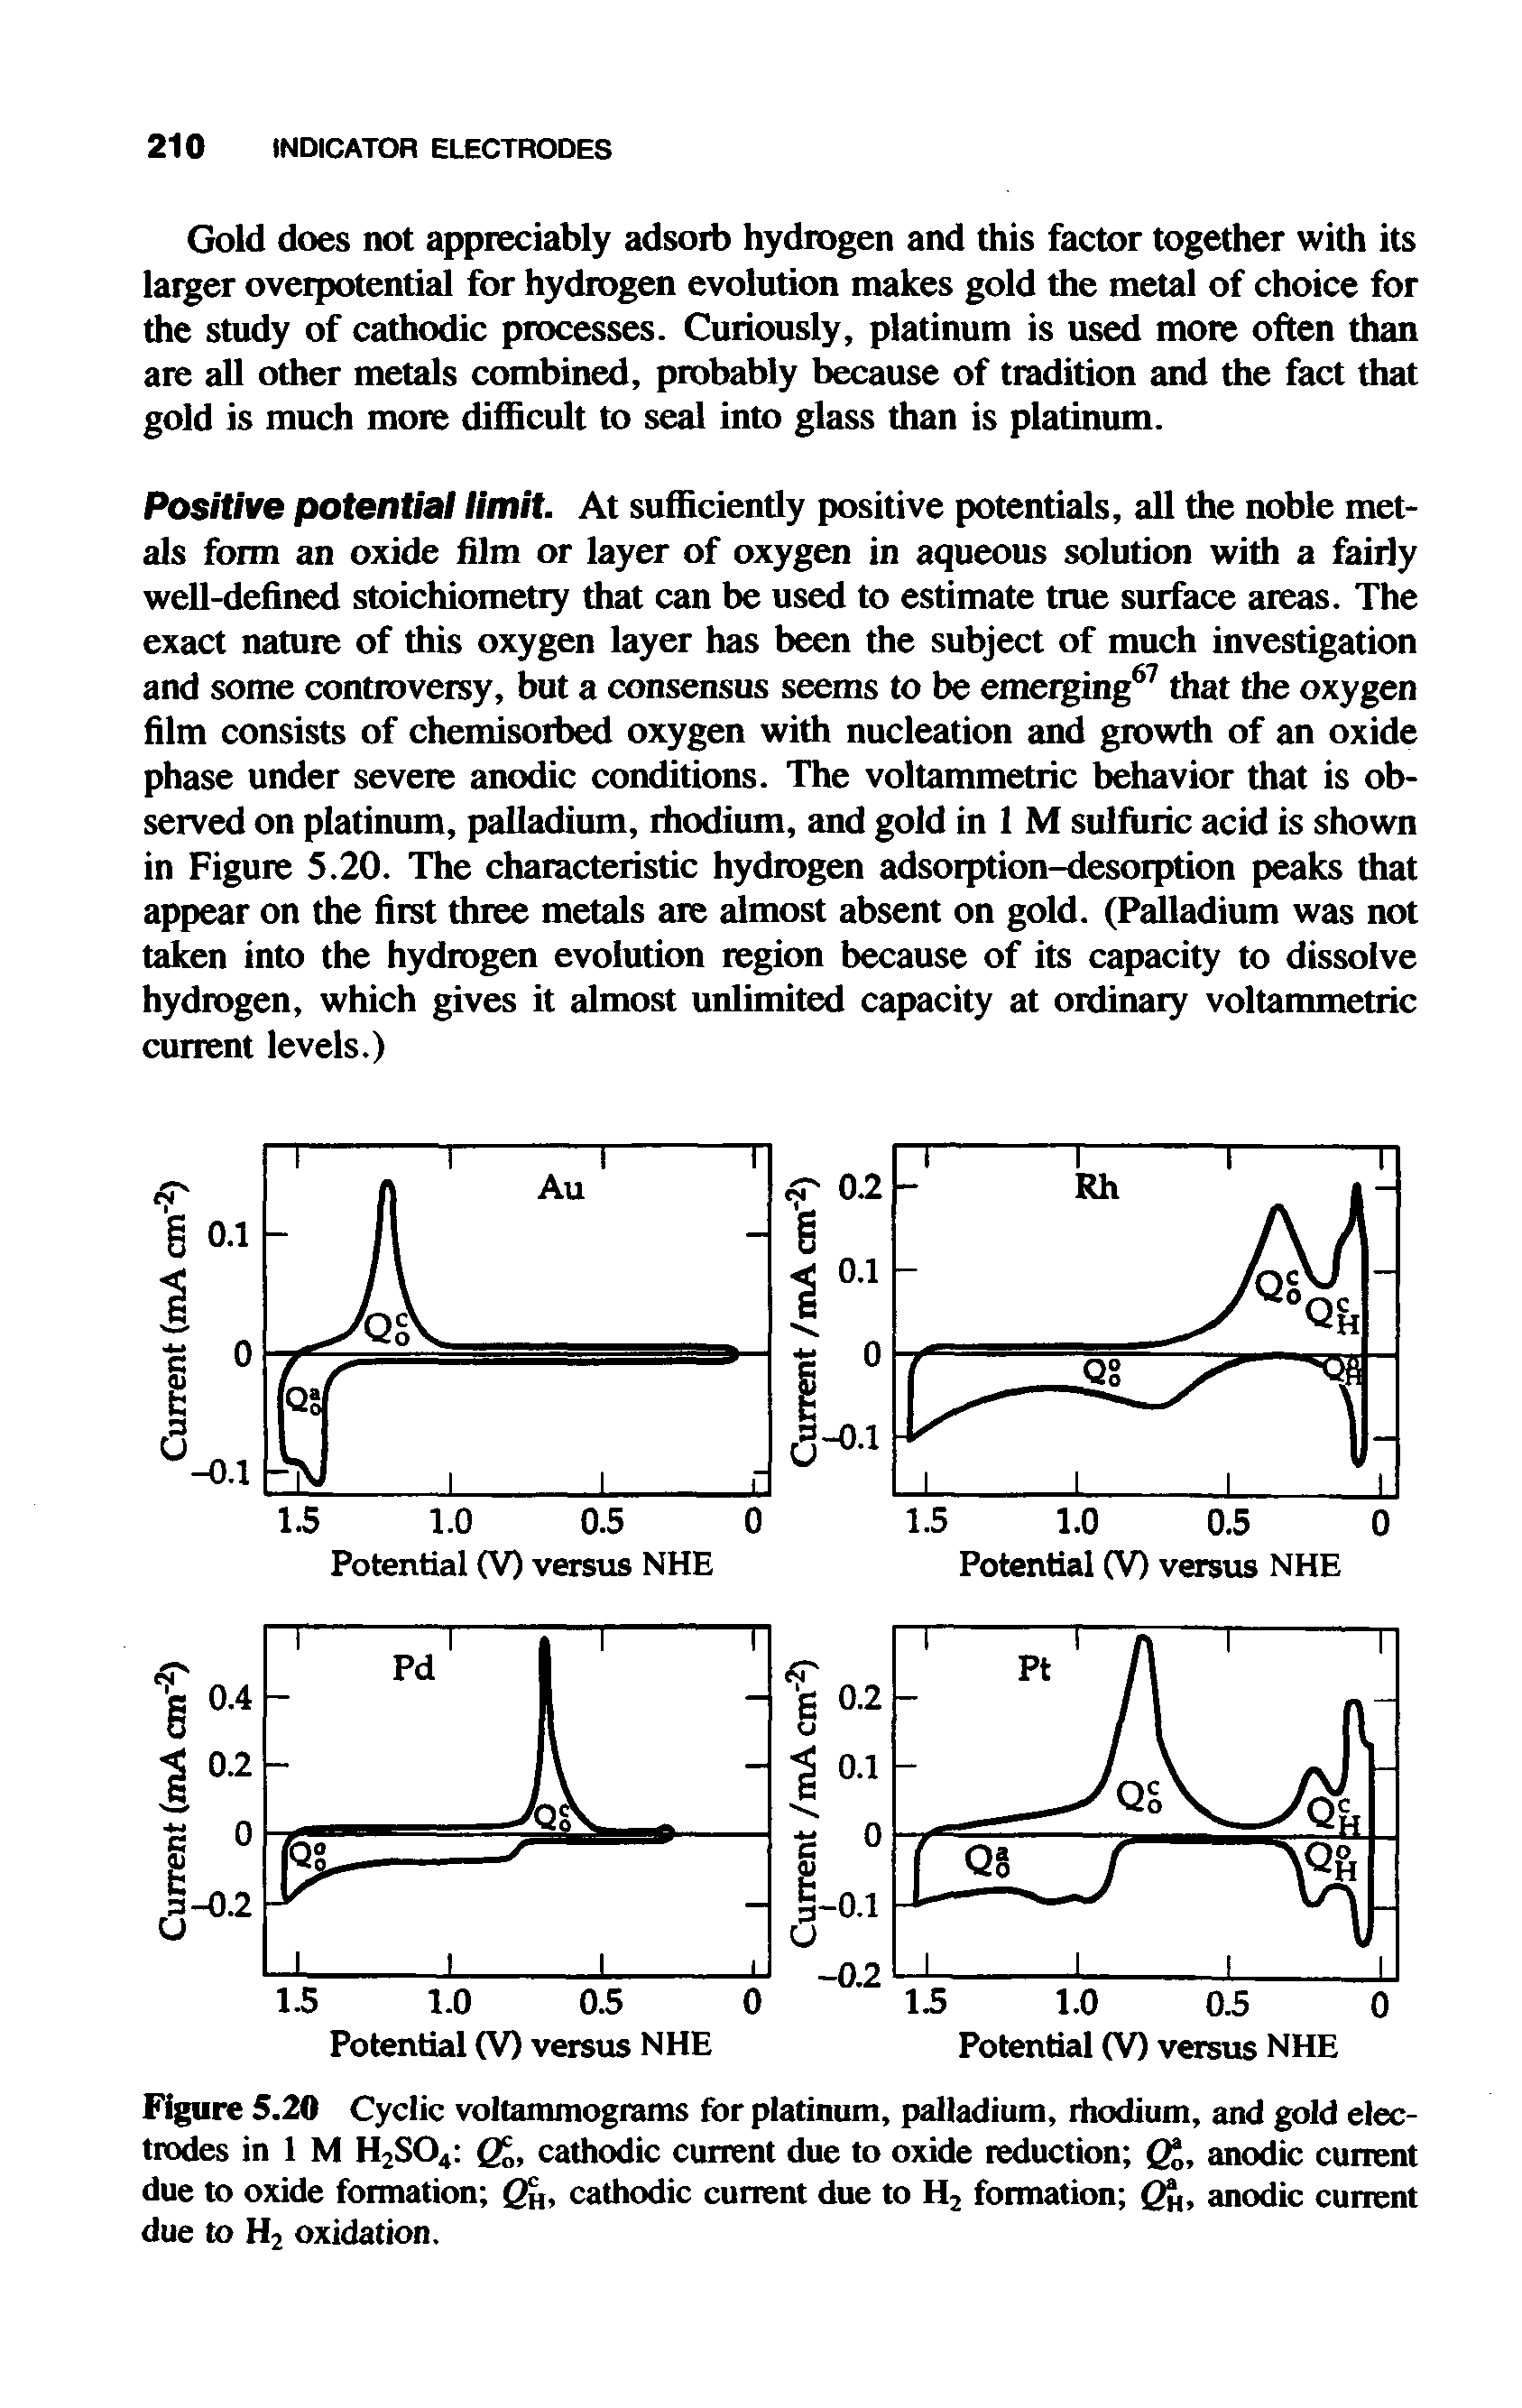 Figure 5.20 Cyclic voltammograms for platinum, palladium, rhodium, and gold electrodes in 1 M H2S04 f , cathodic current due to oxide reduction ( , anodic current due to oxide formation g , cathodic current due to H2 formation Q, anodic current due to H2 oxidation.